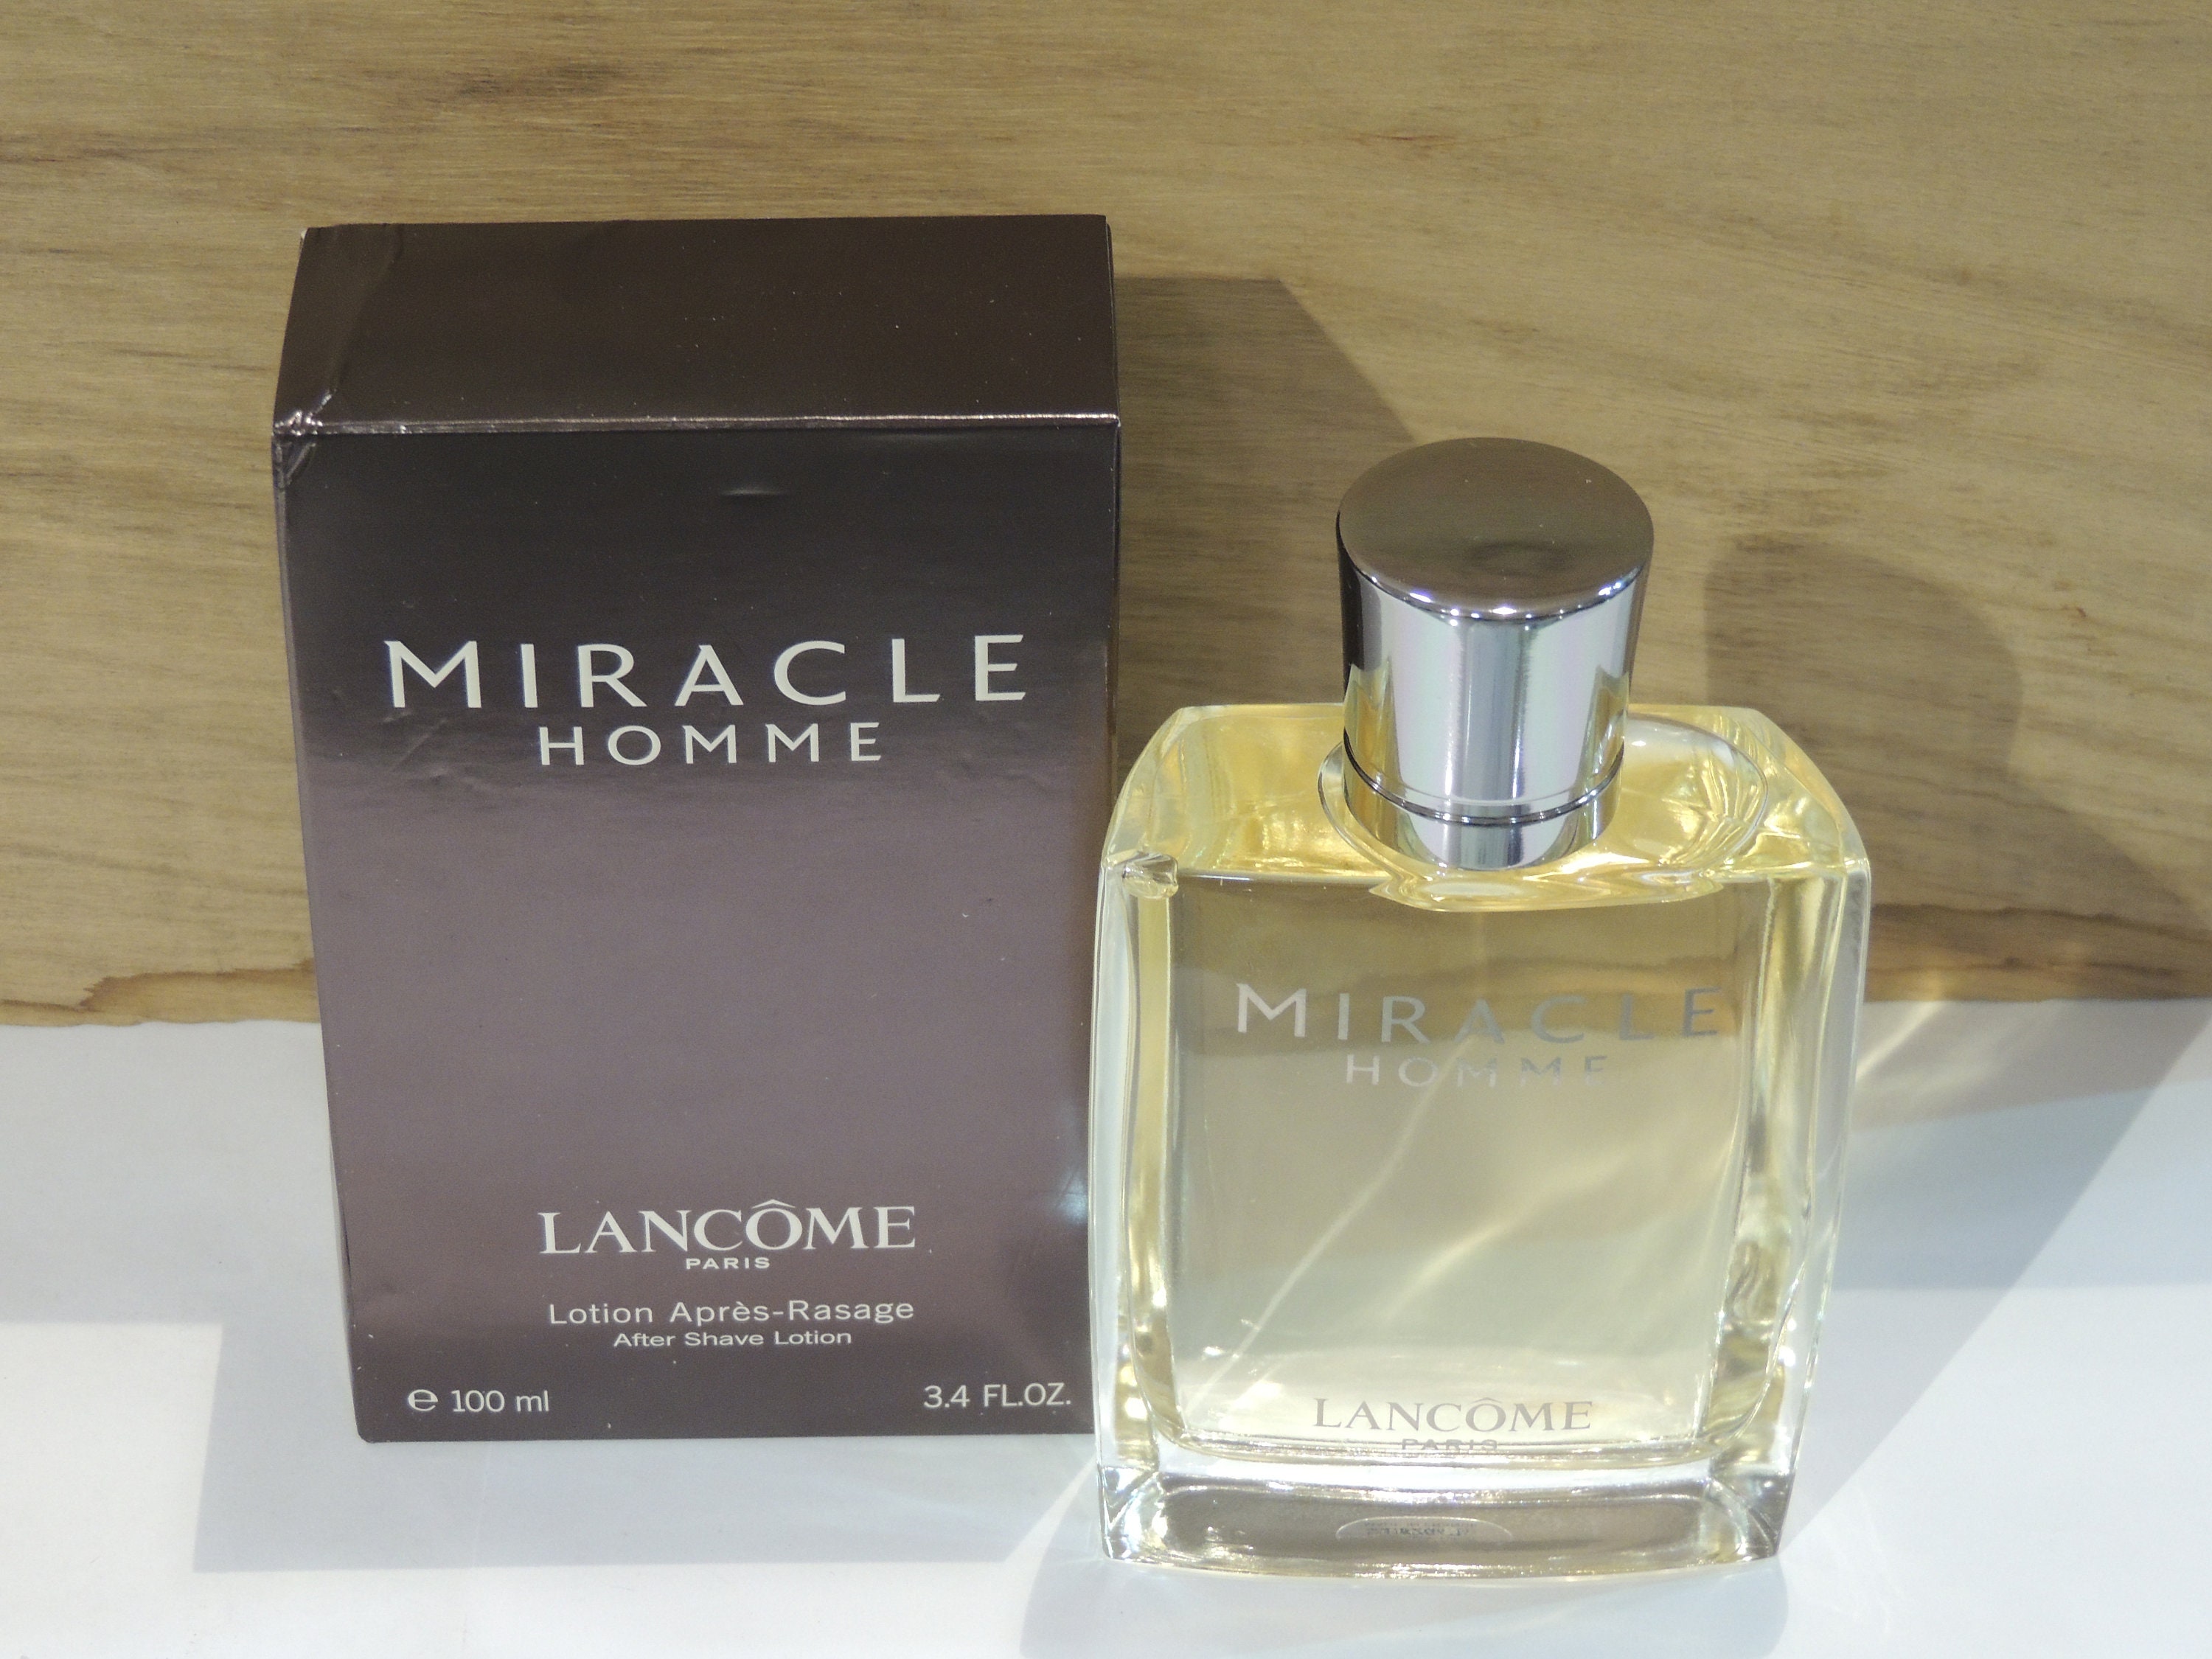 Lancome Miracle homme. Ланком homme. Lancome homme